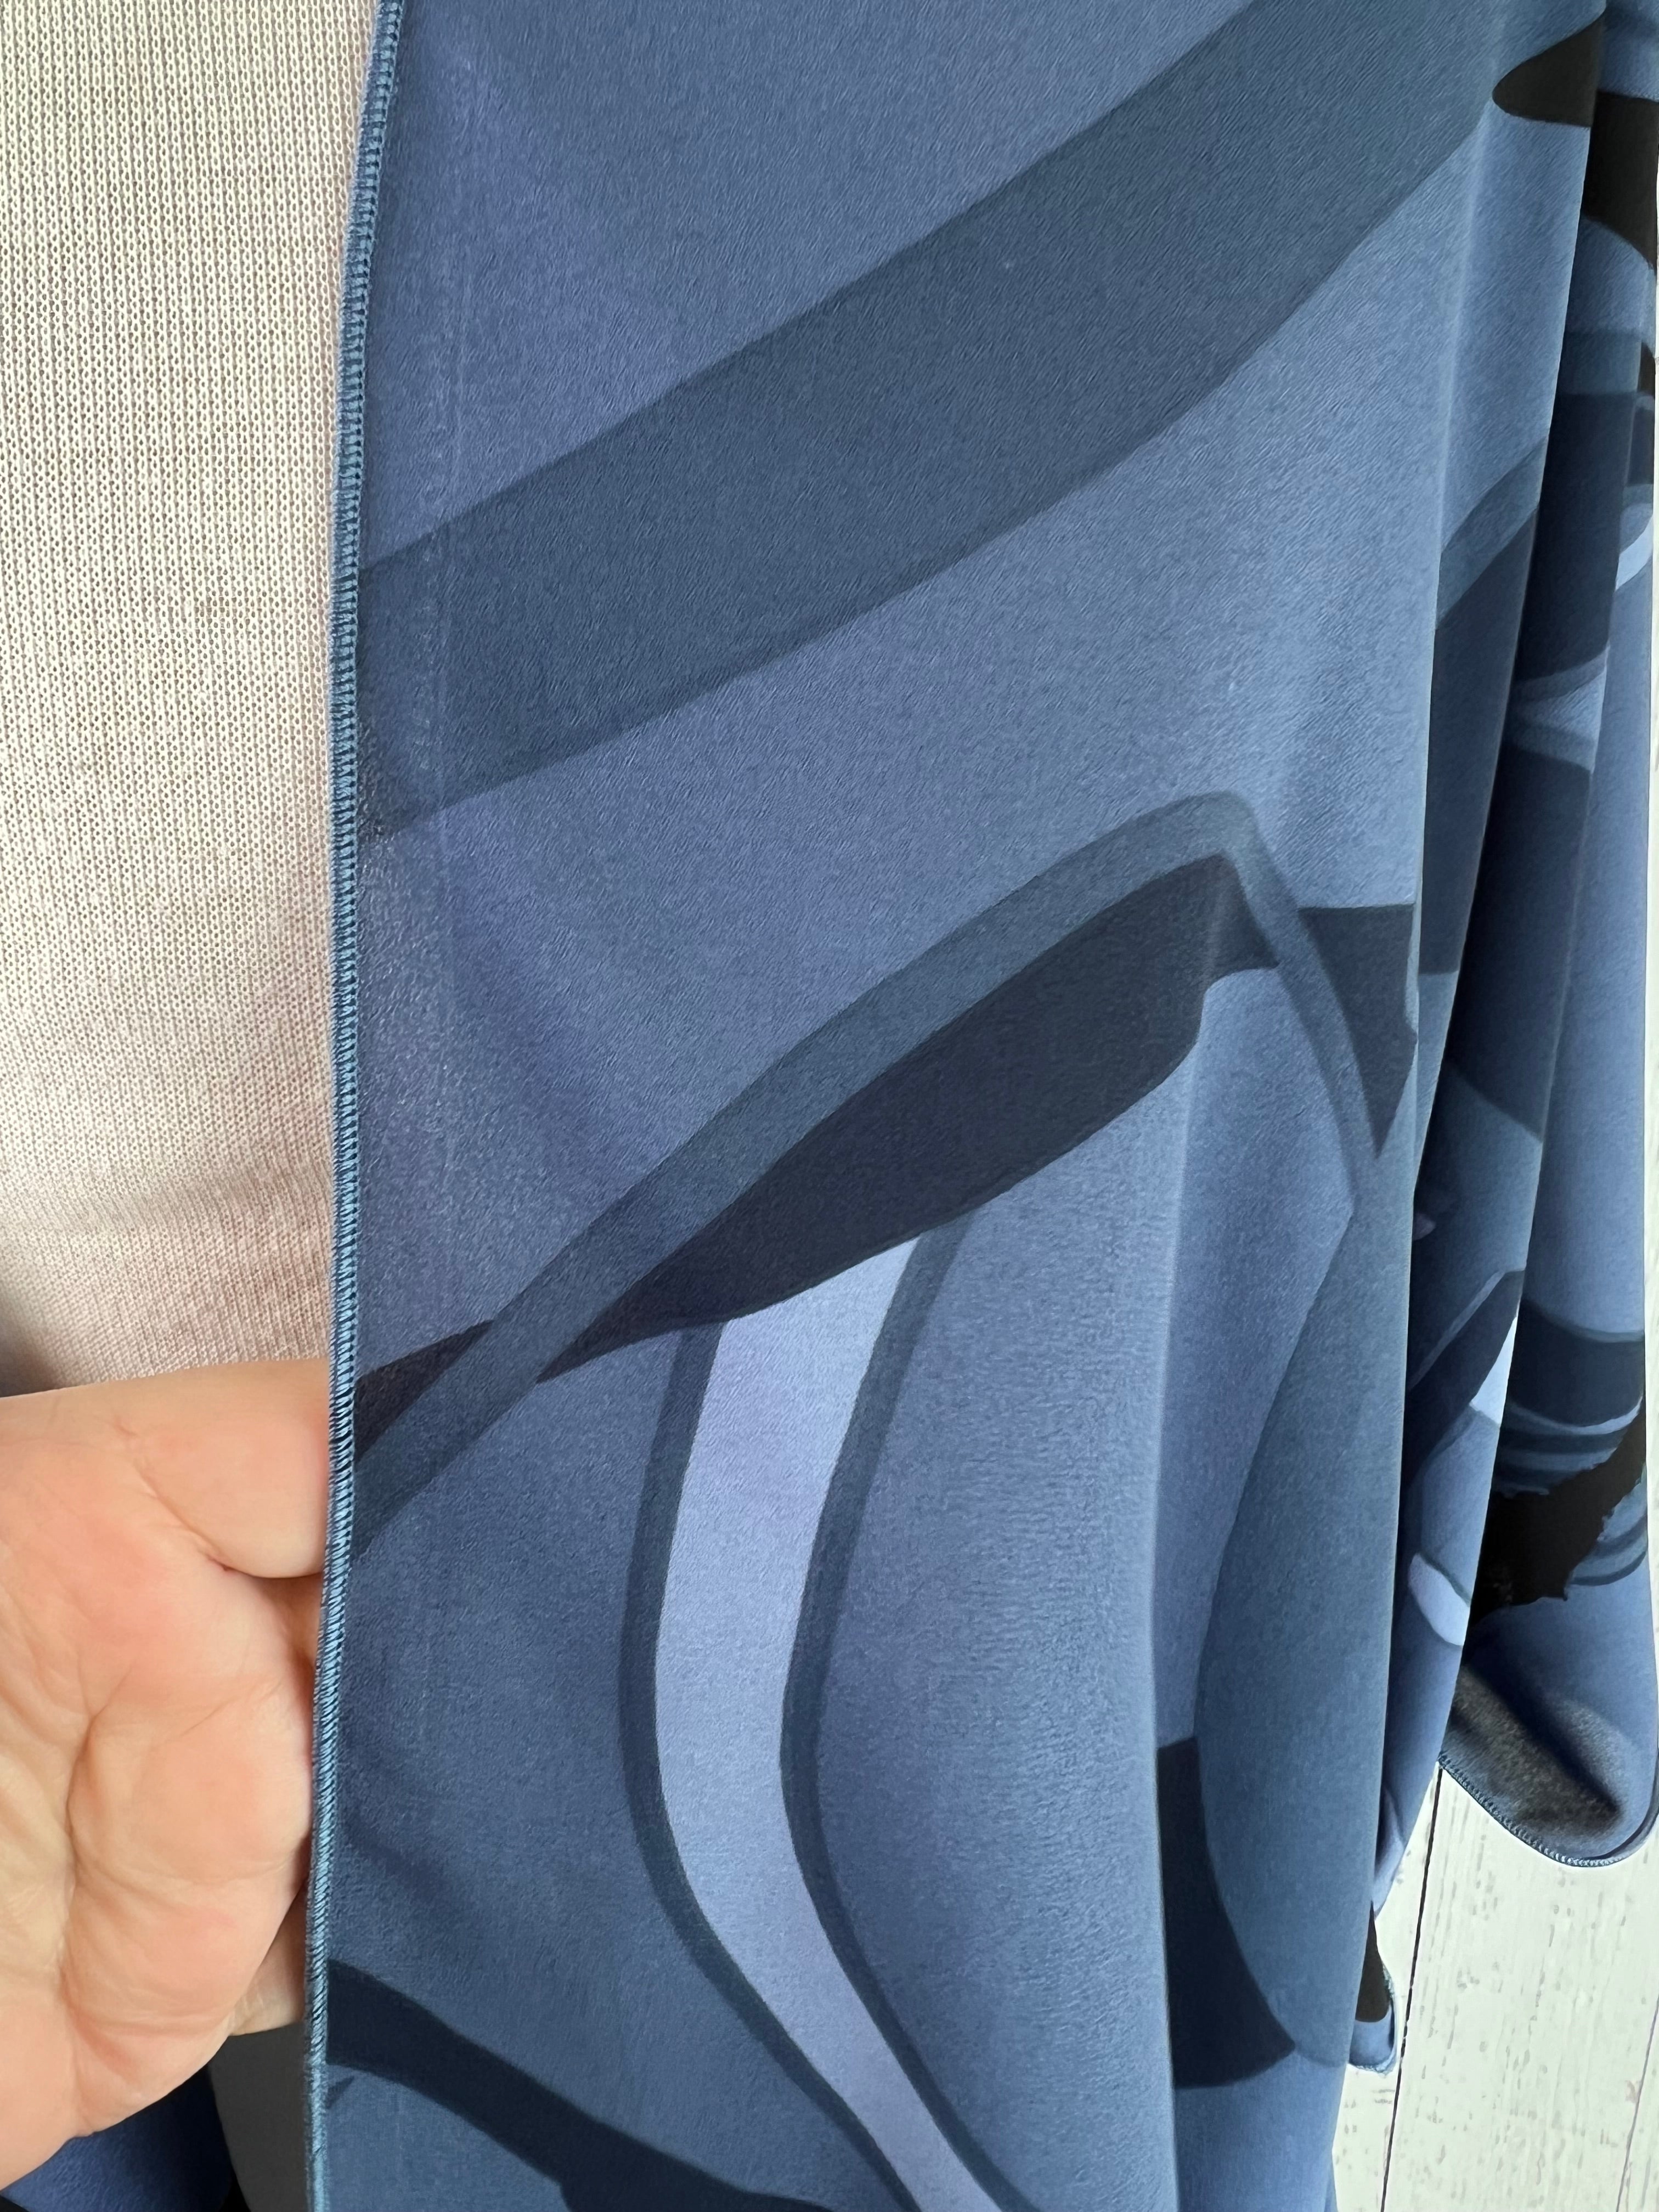 Blue Abstract Sleeved Kimono Various Lengths